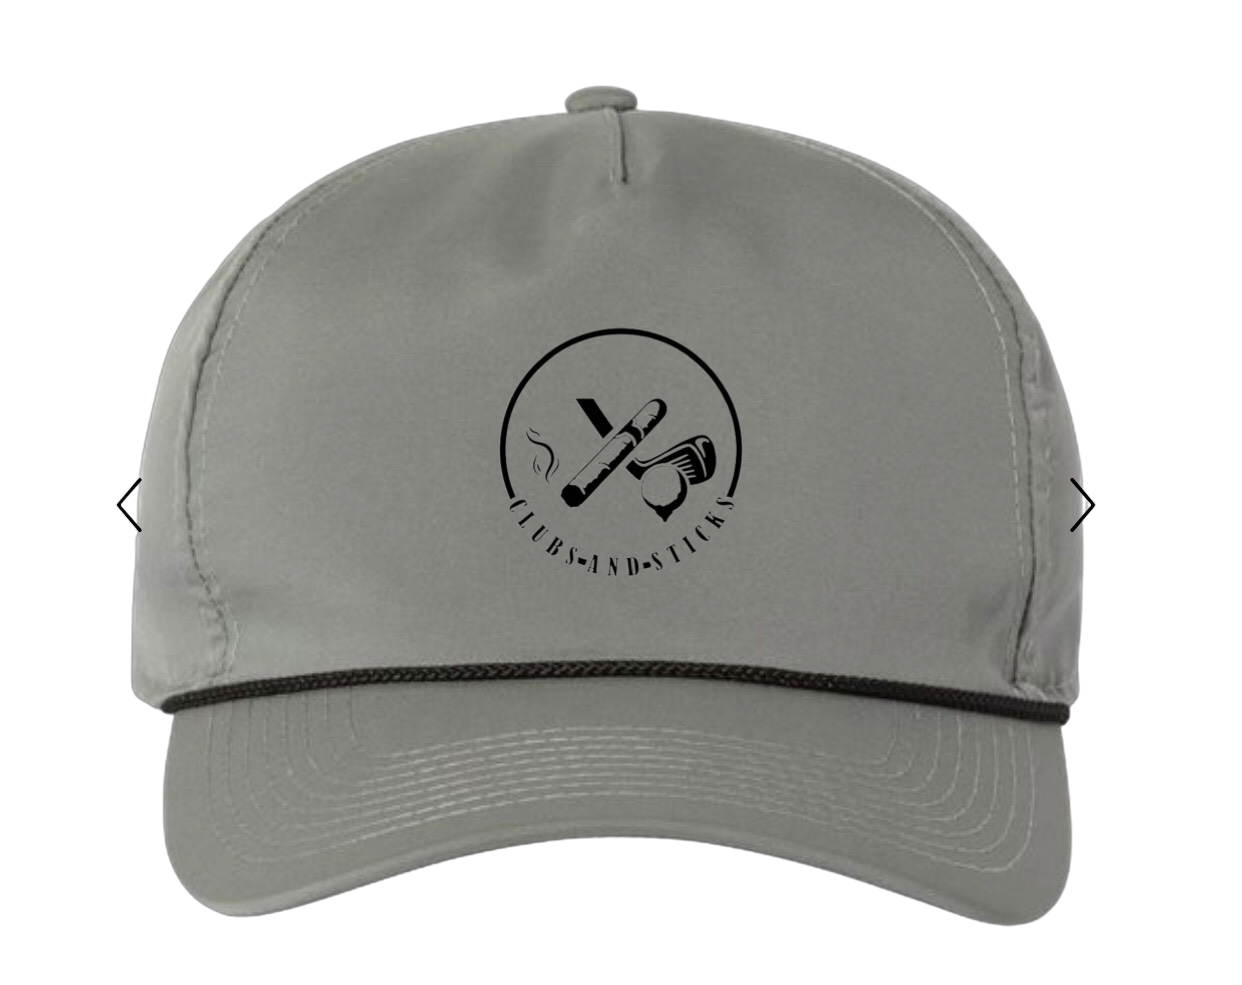 Clubs and Sticks Polyester adjustable Hat